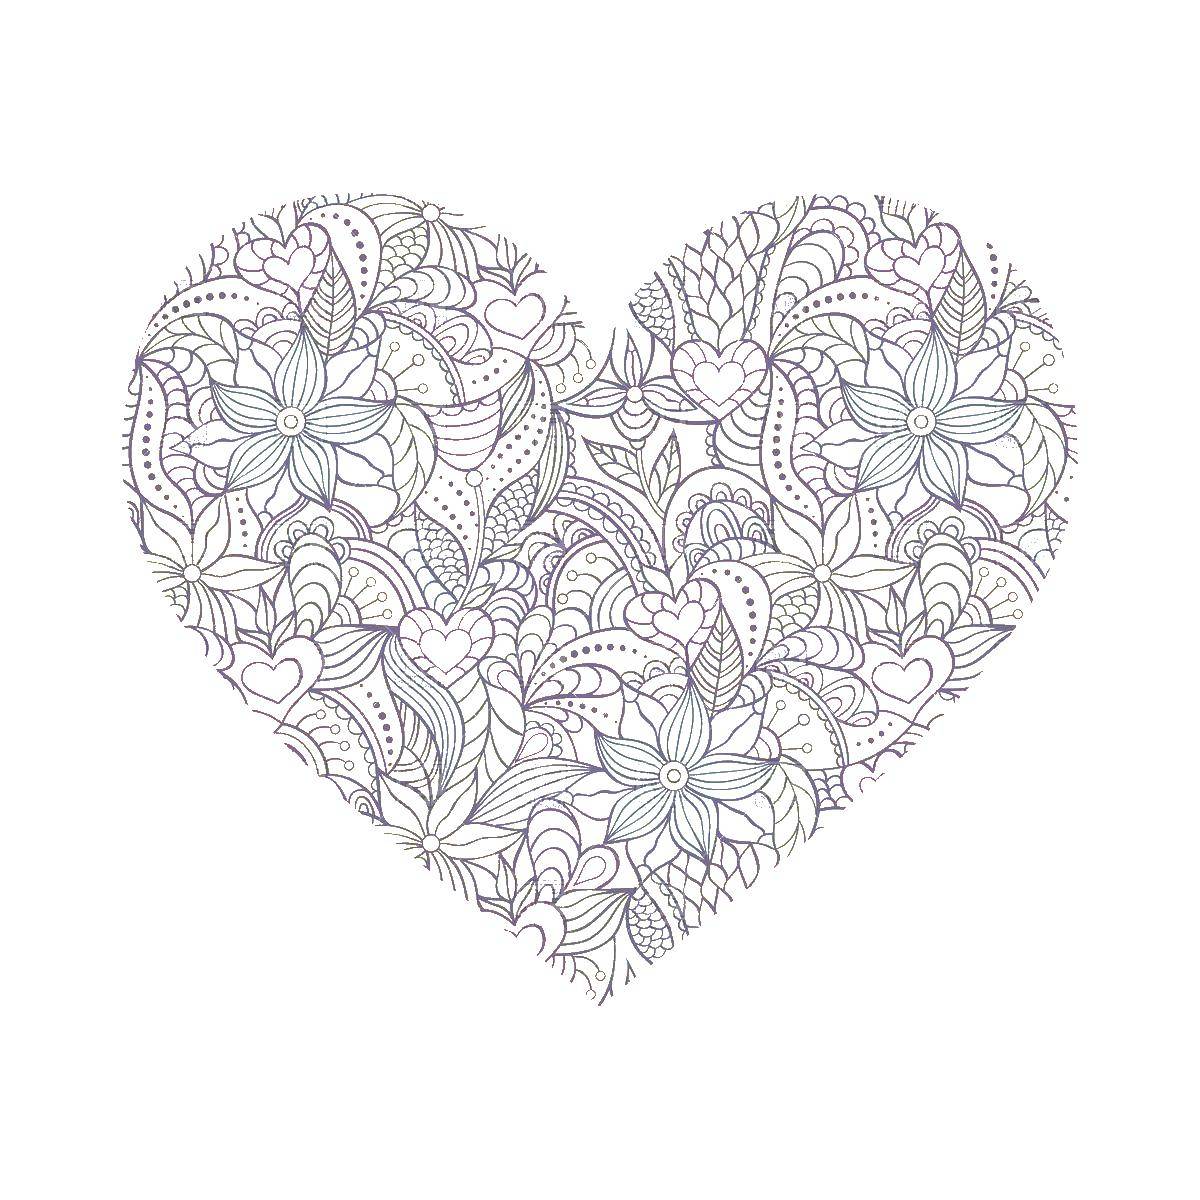 Coloring Floral heart. Category Bathroom with shower. Tags:  the antistress, patterns, flowers.